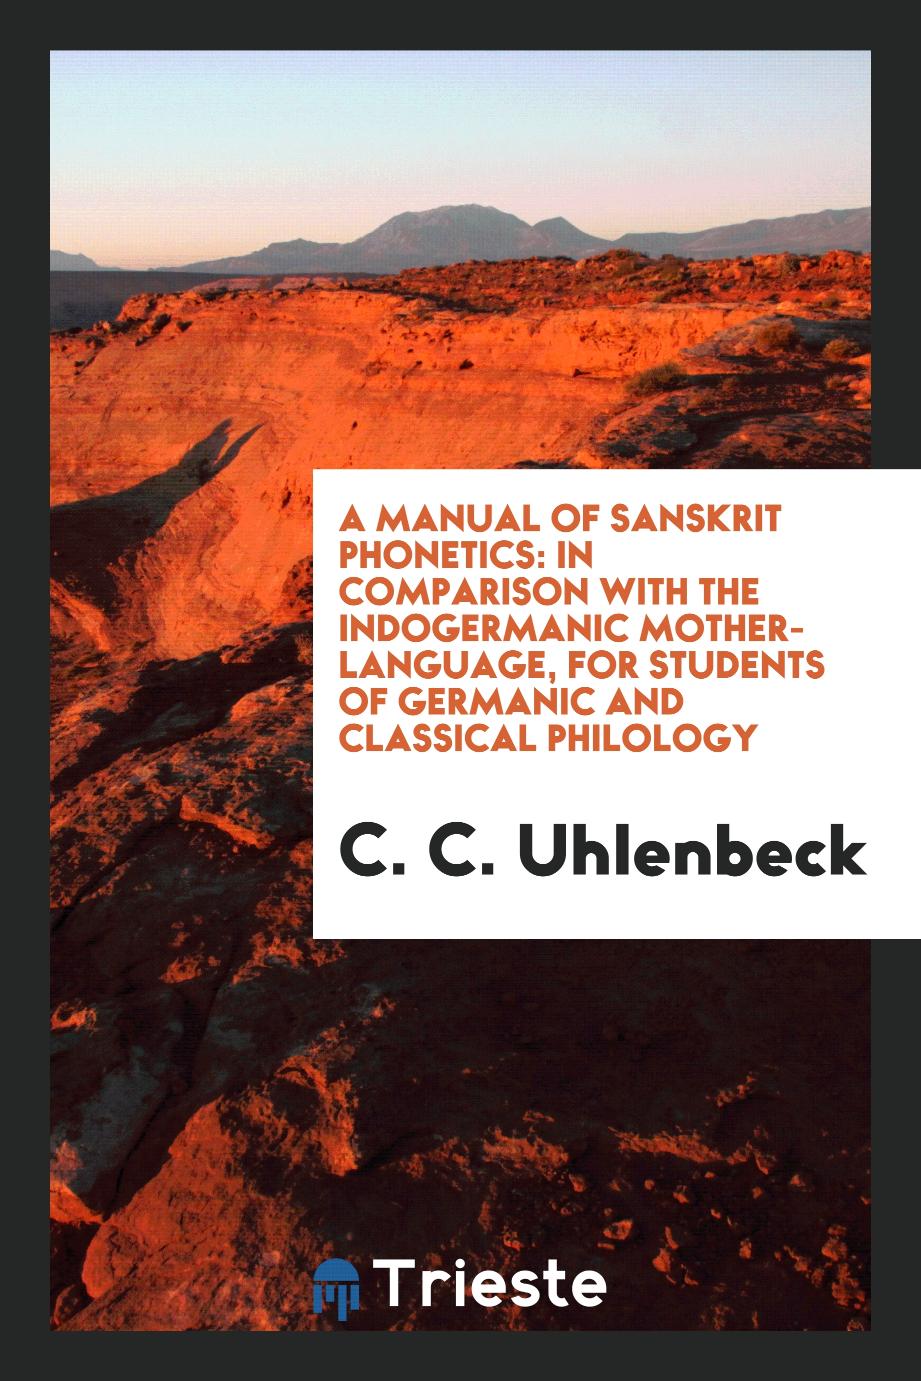 A Manual of Sanskrit Phonetics: In Comparison with the Indogermanic Mother-Language, for Students of Germanic and Classical Philology